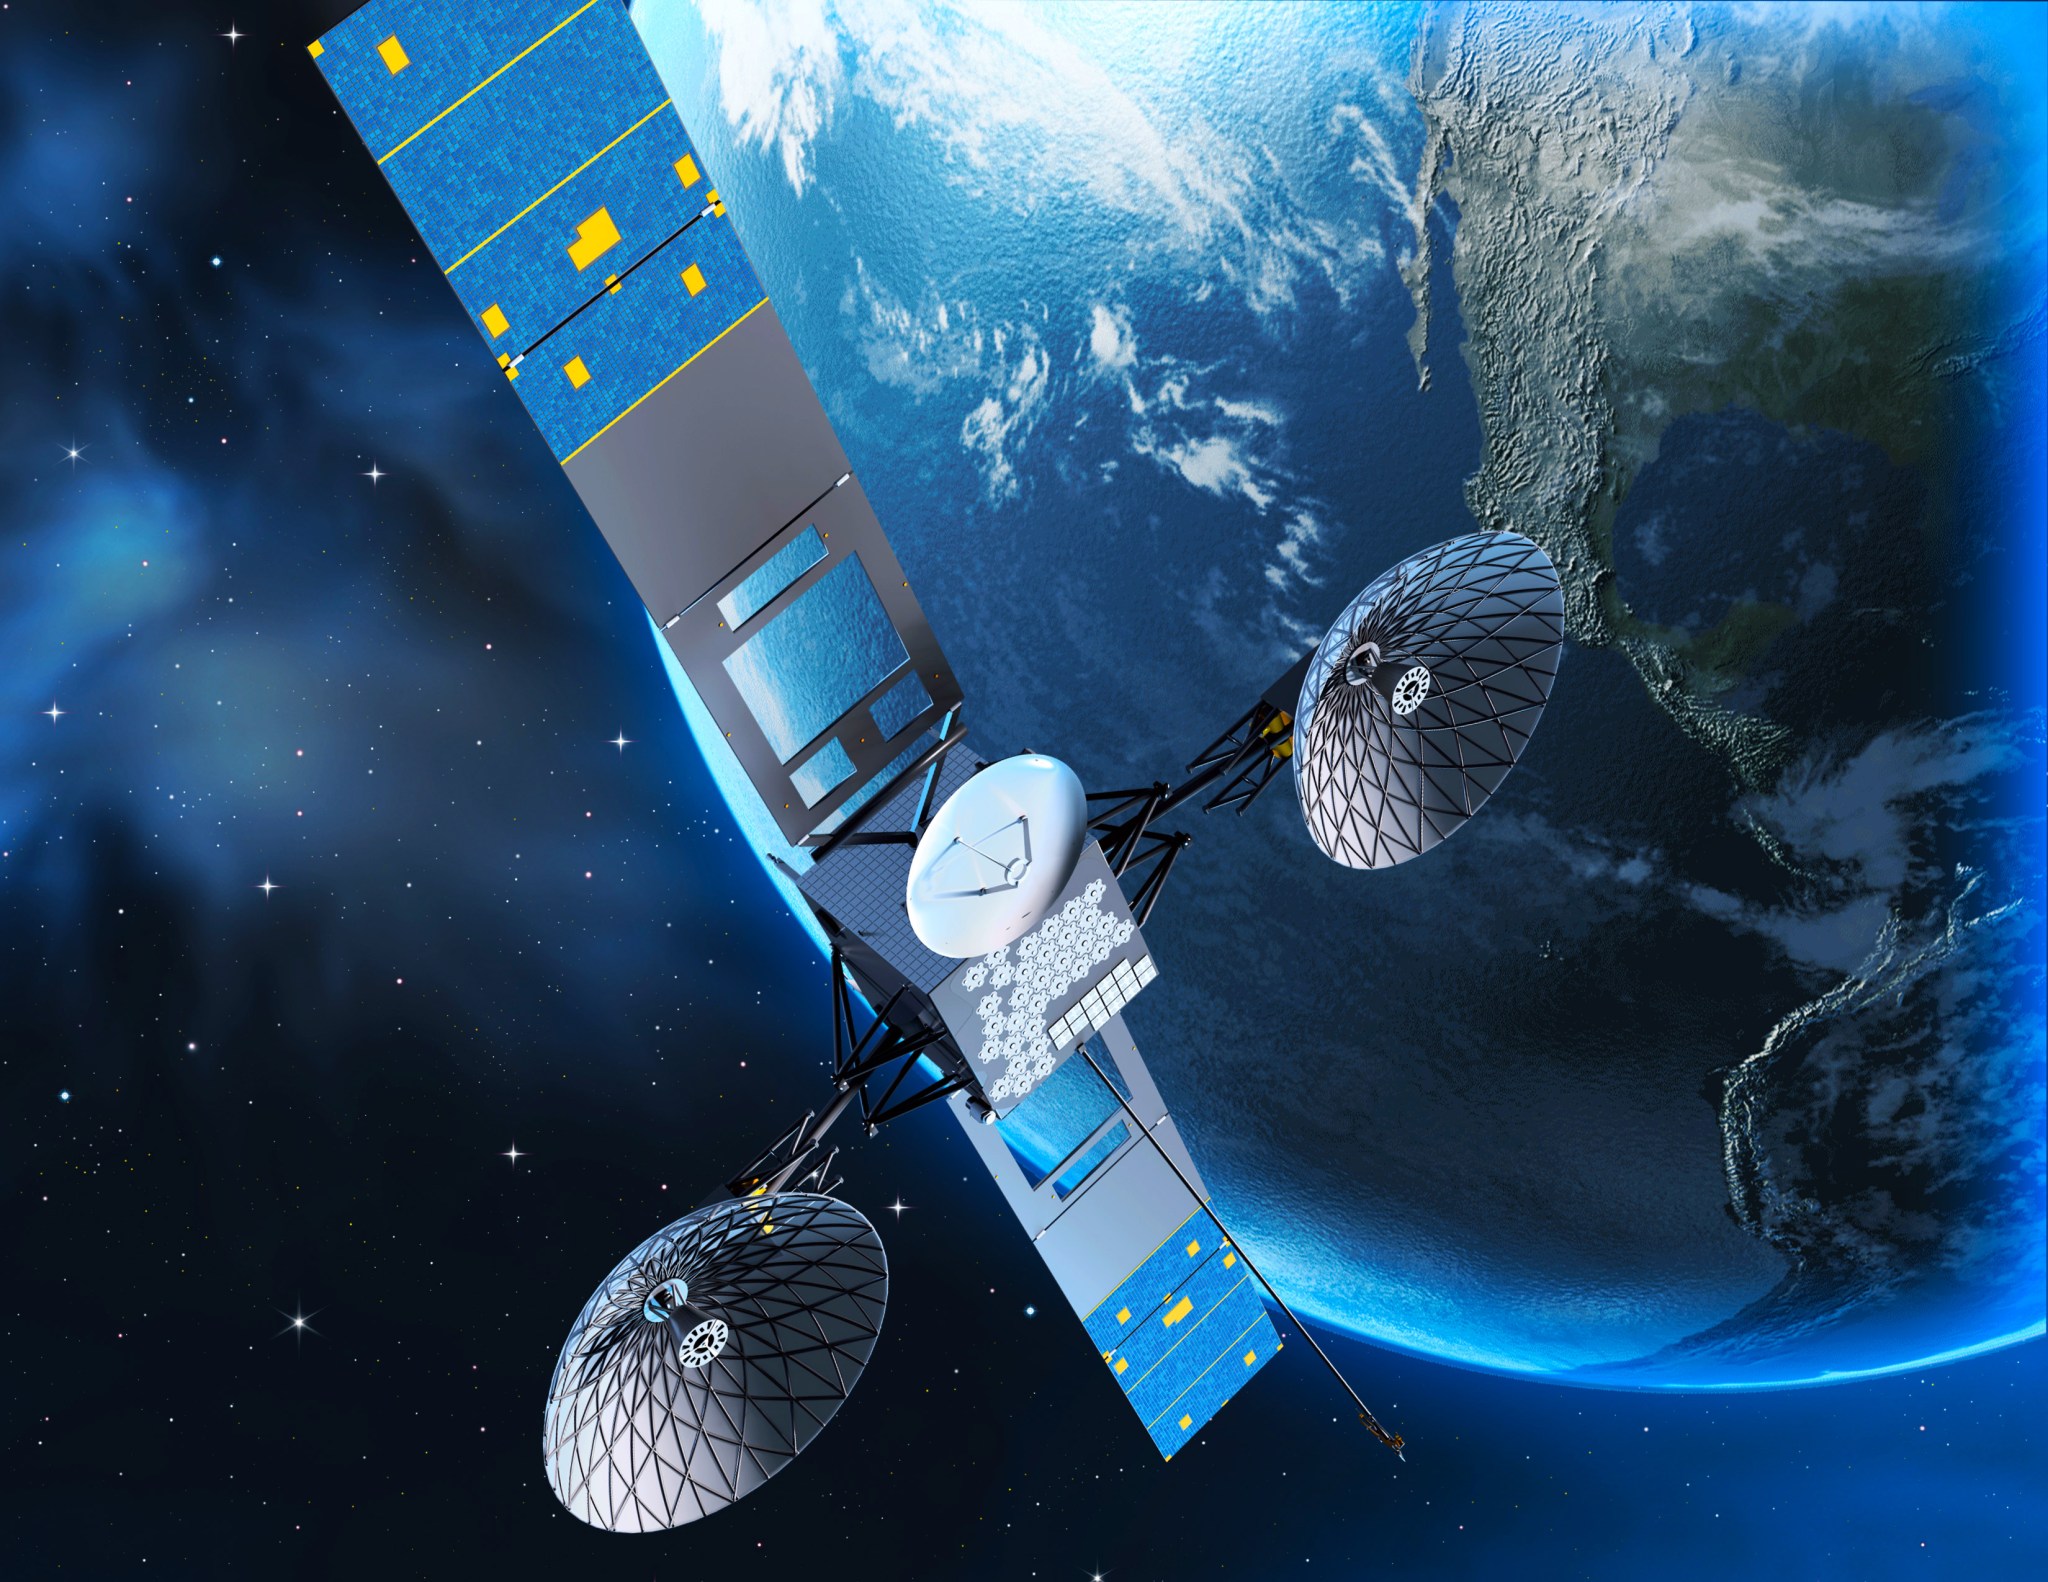 Artist's concept of a Tracking and Data Relay (TDRS) satellite in orbit around the Earth. TDRS have long provided robust communications services to near-Earth NASA missions. By 2030, NASA hopes to transition near-Earth services from government-owned assets like TDRS to commercial communications infrastructure.